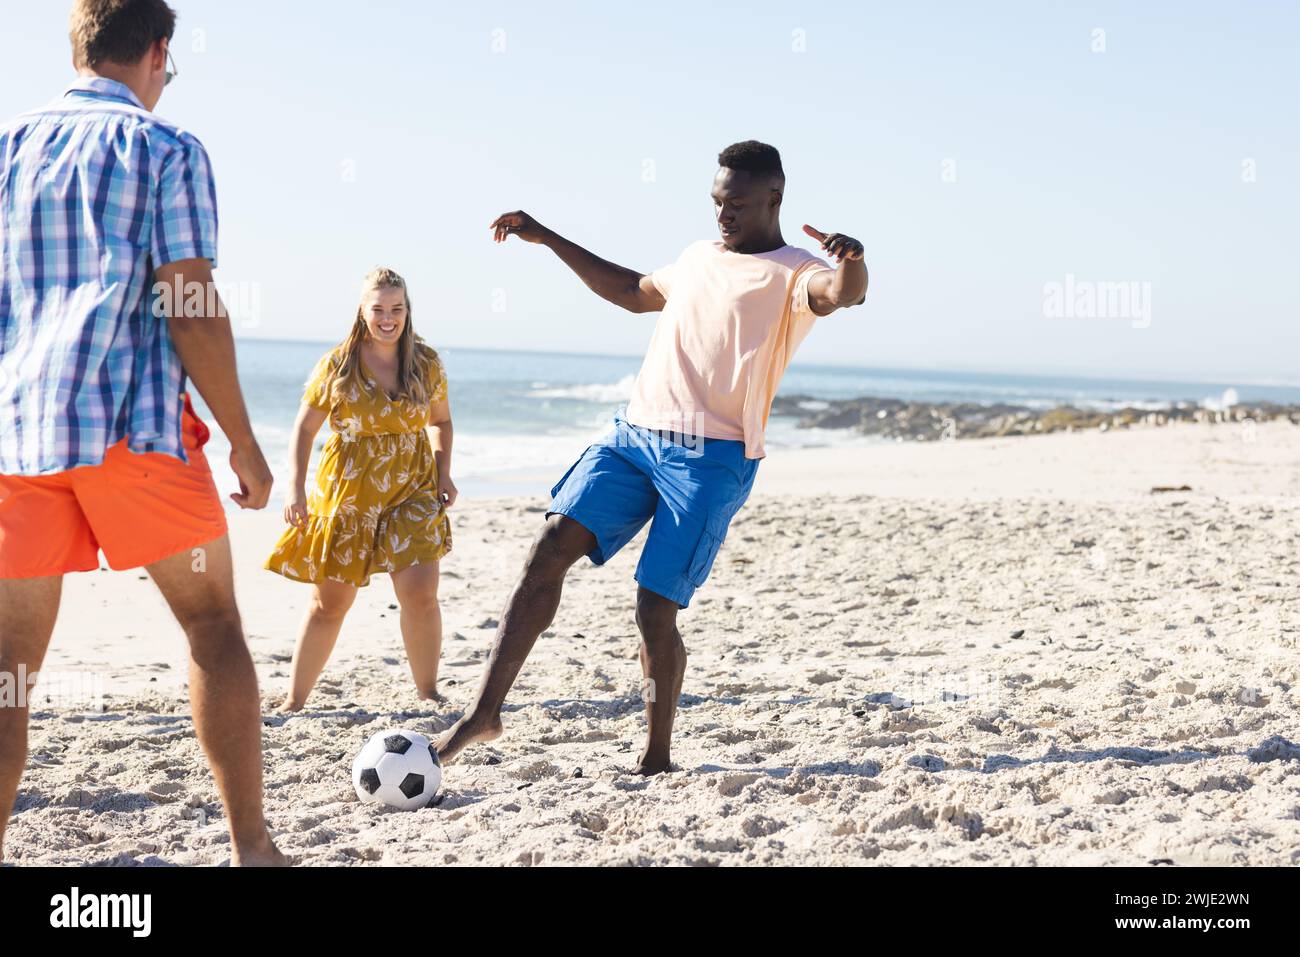 Diverse friends enjoy a casual game of soccer on the beach Stock Photo